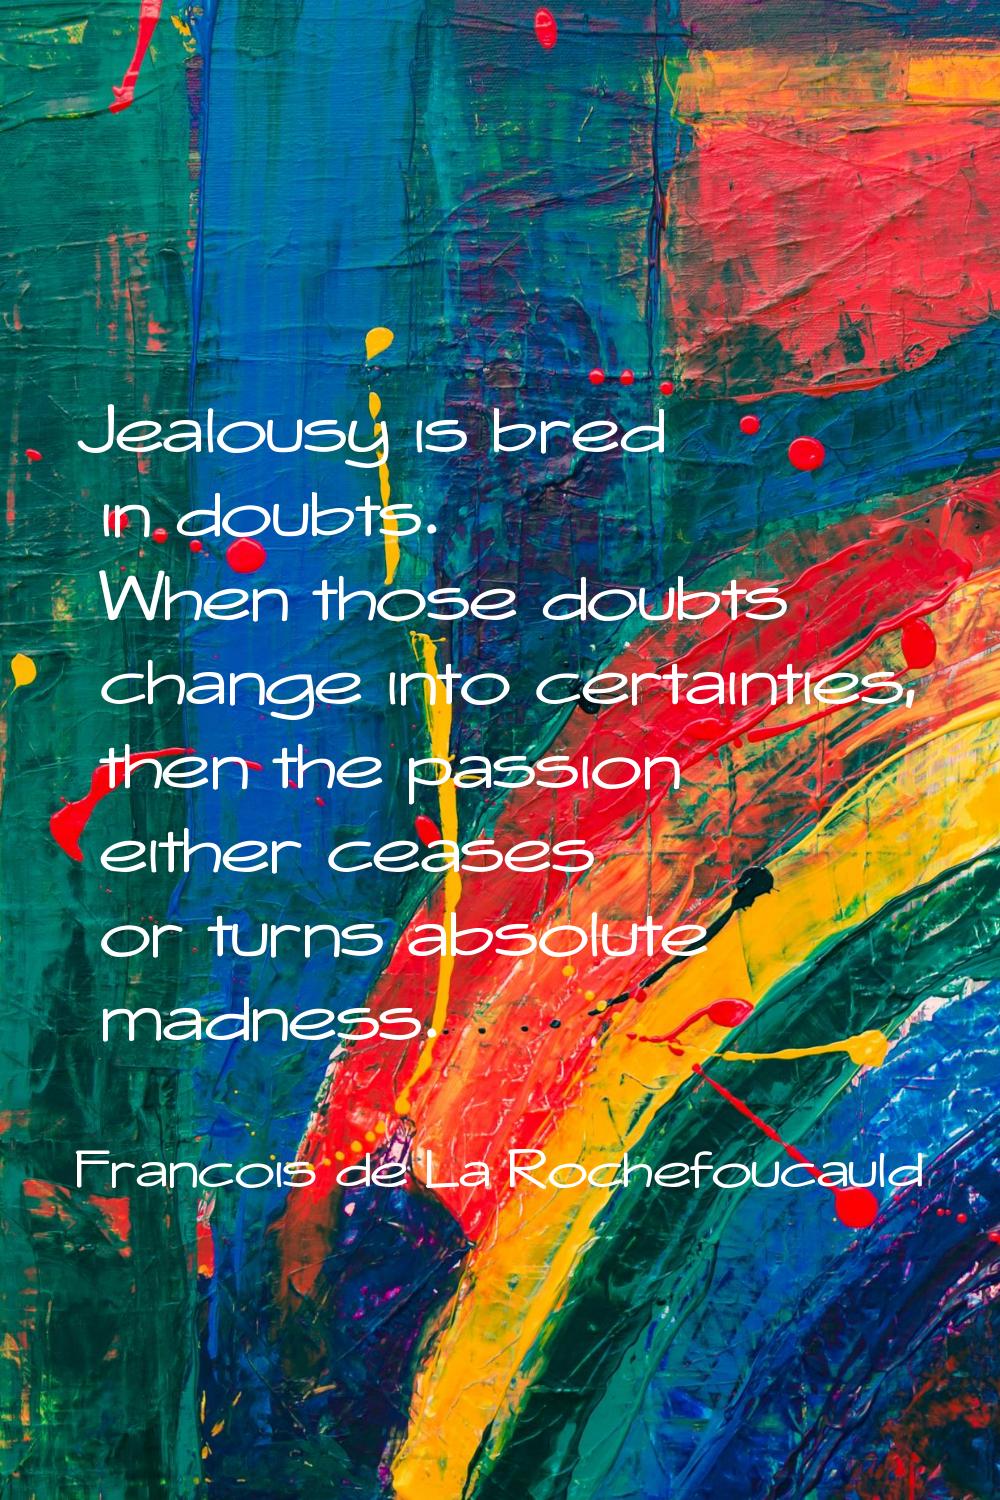 Jealousy is bred in doubts. When those doubts change into certainties, then the passion either ceas